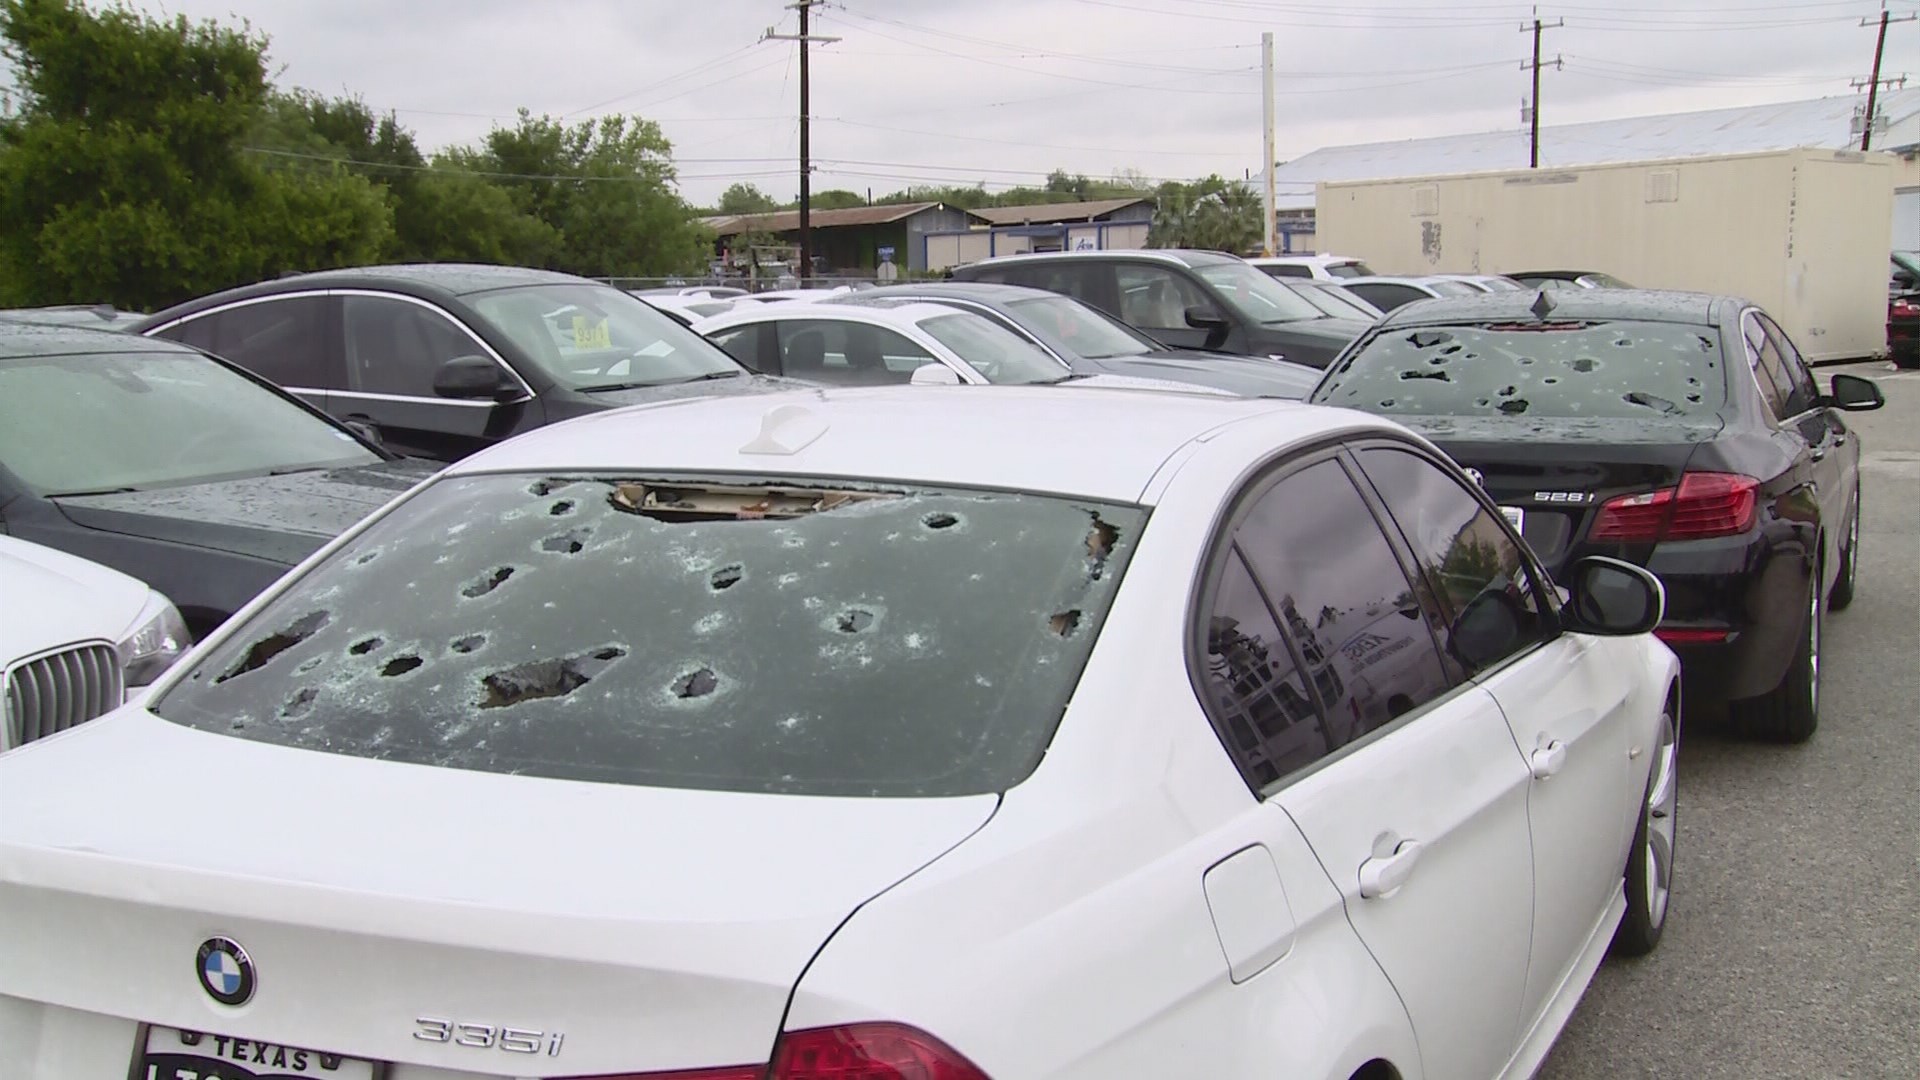 Millions in damages at local BMW dealership after hail storm